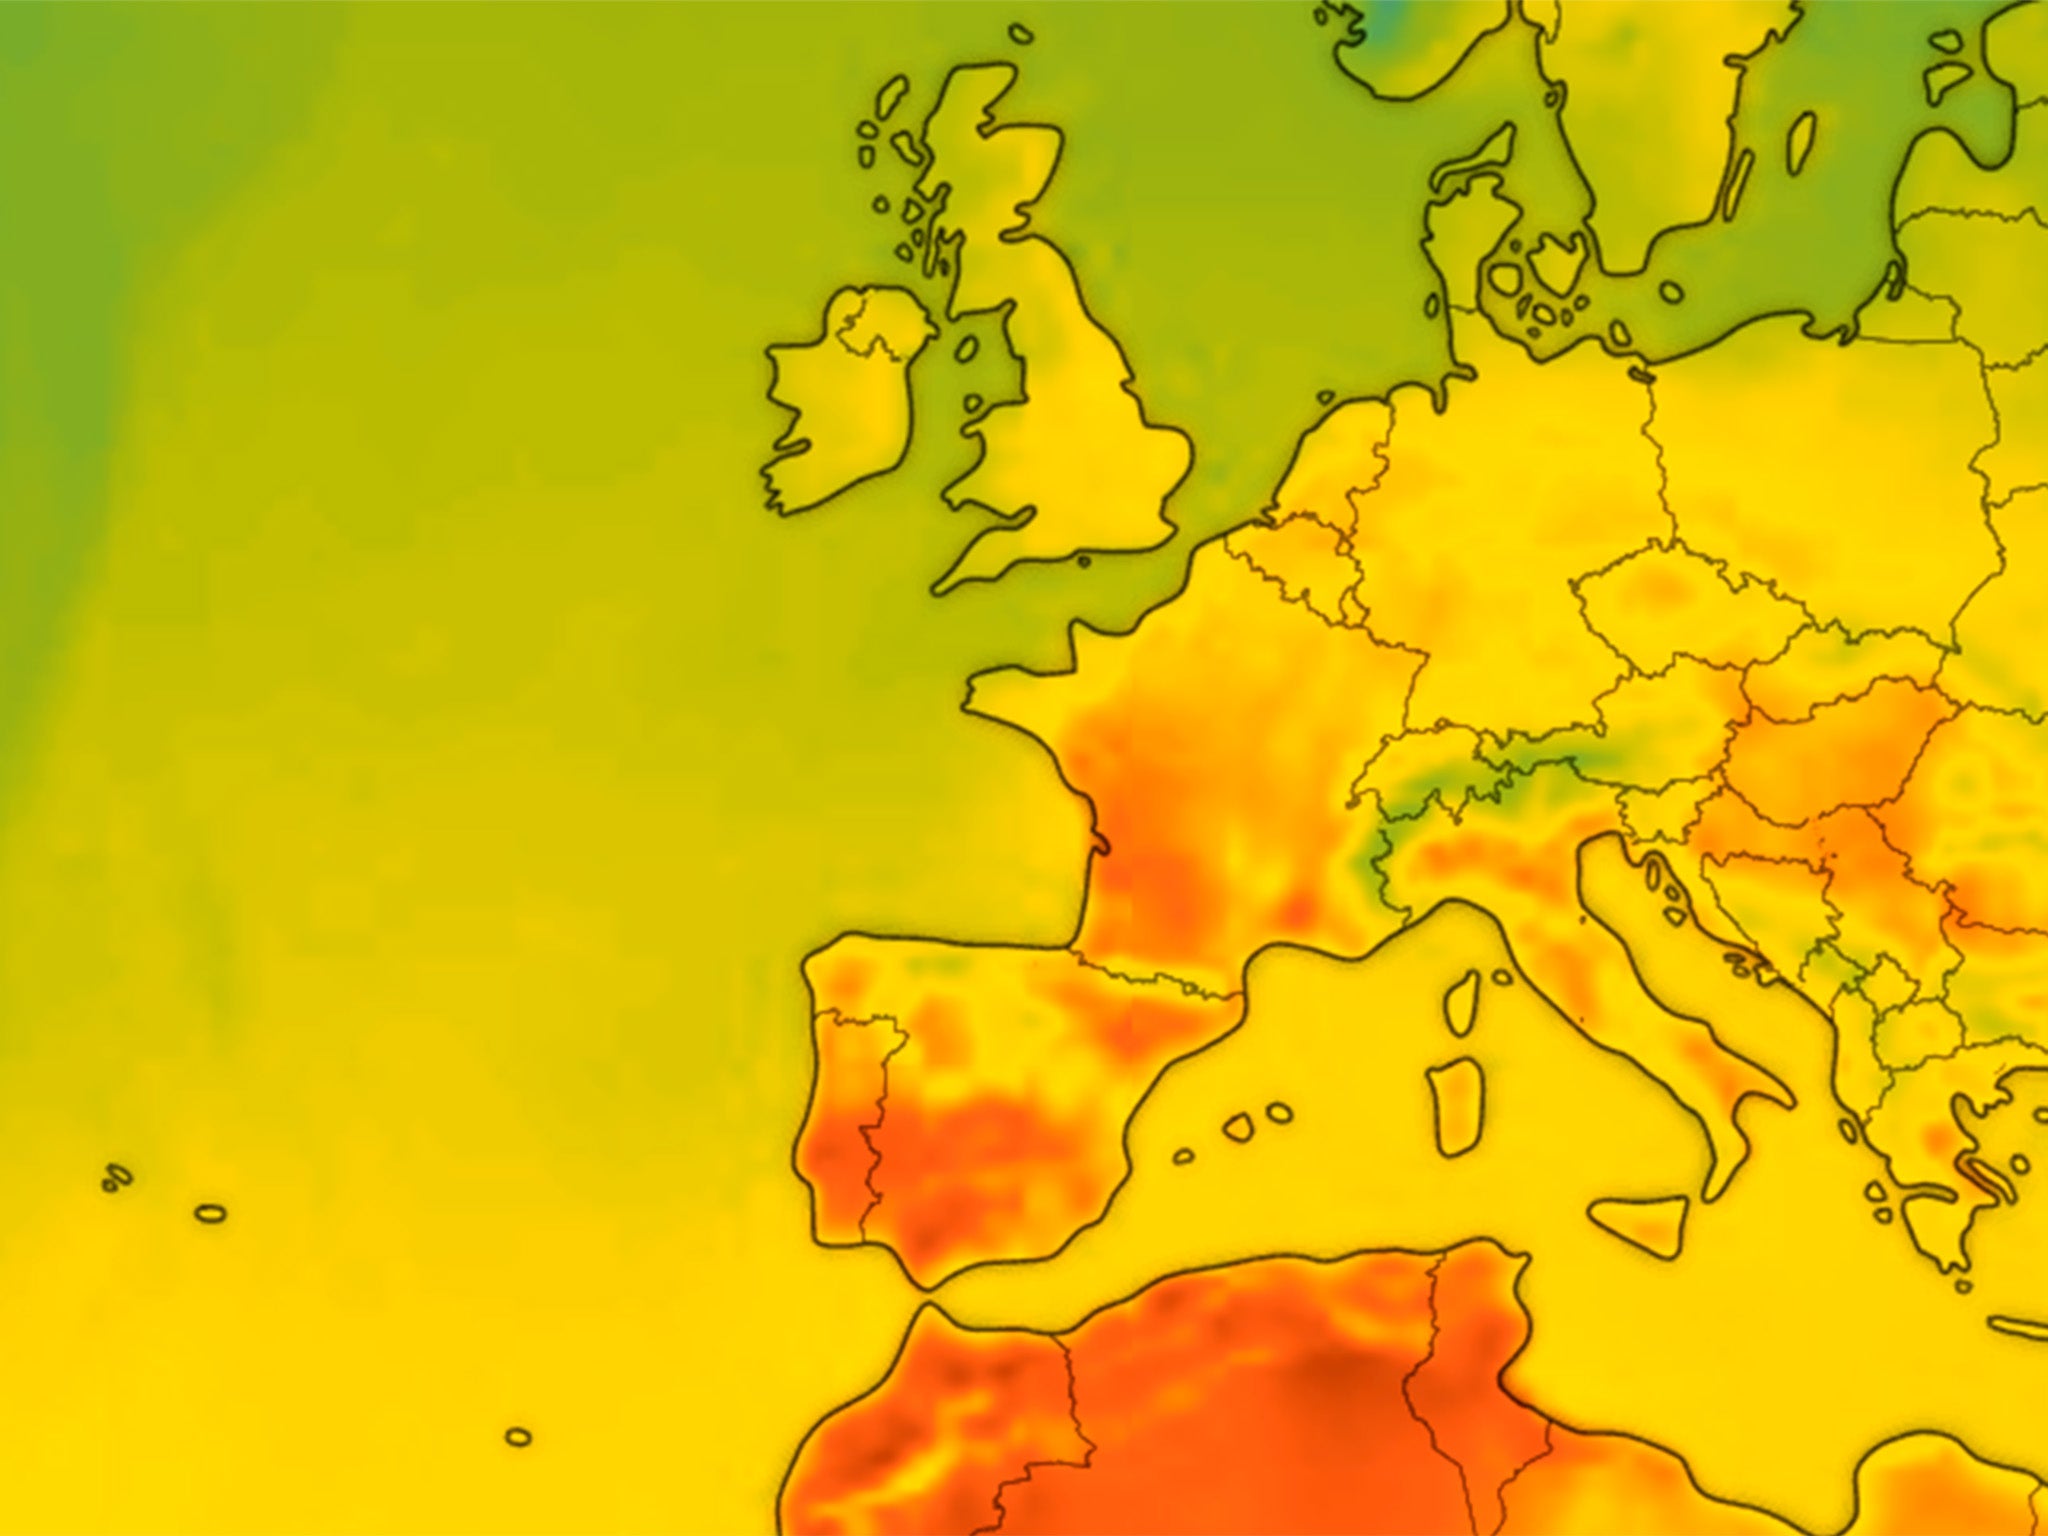 Forecast map for 5pm on Saturday shows the heat moving up from north Africa